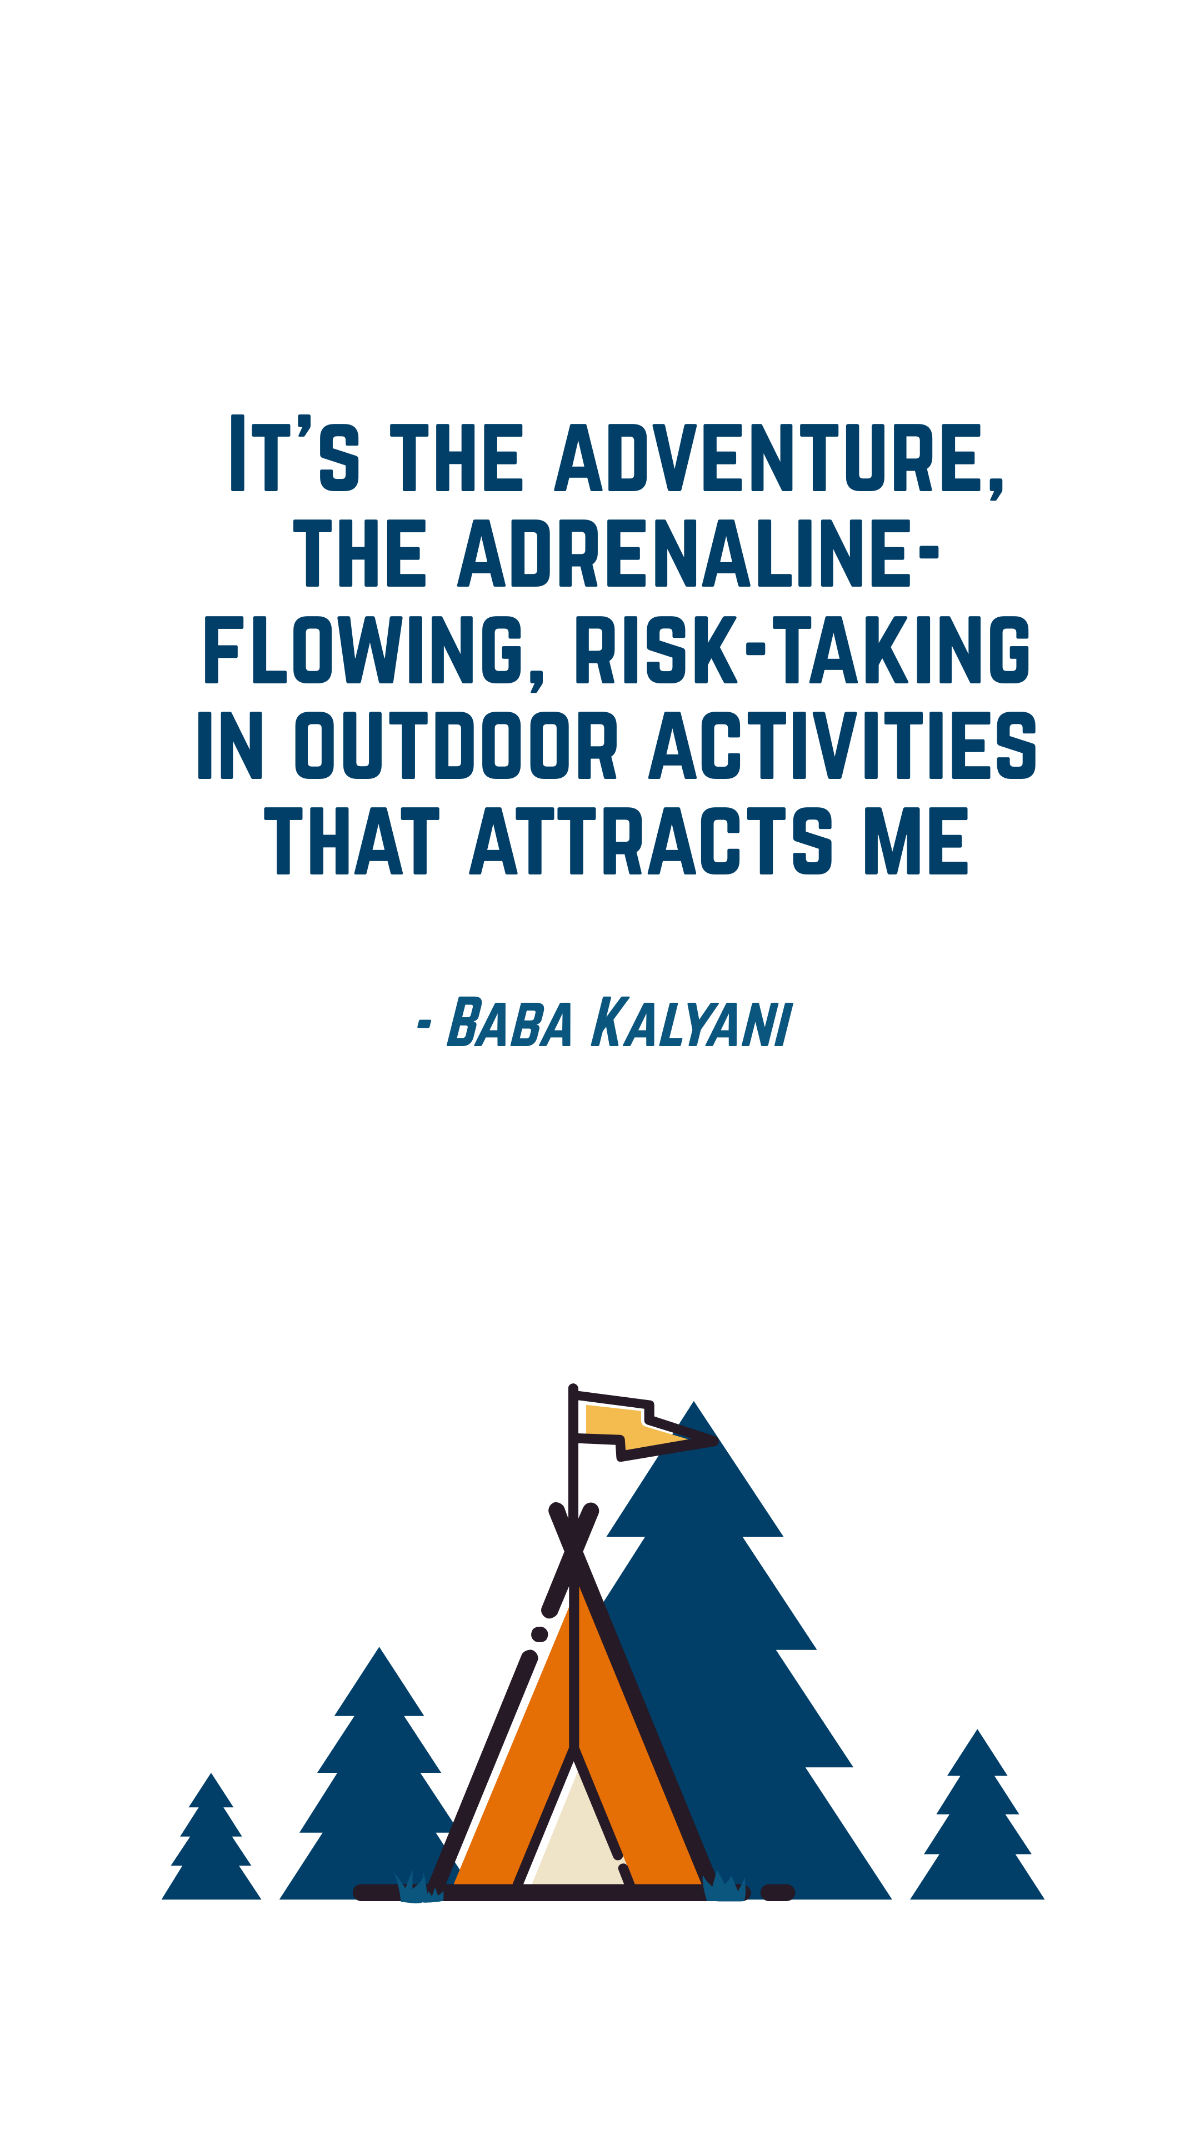 Free Baba Kalyani - It's the adventure, the adrenaline-flowing, risk-taking in outdoor activities that attracts me Template